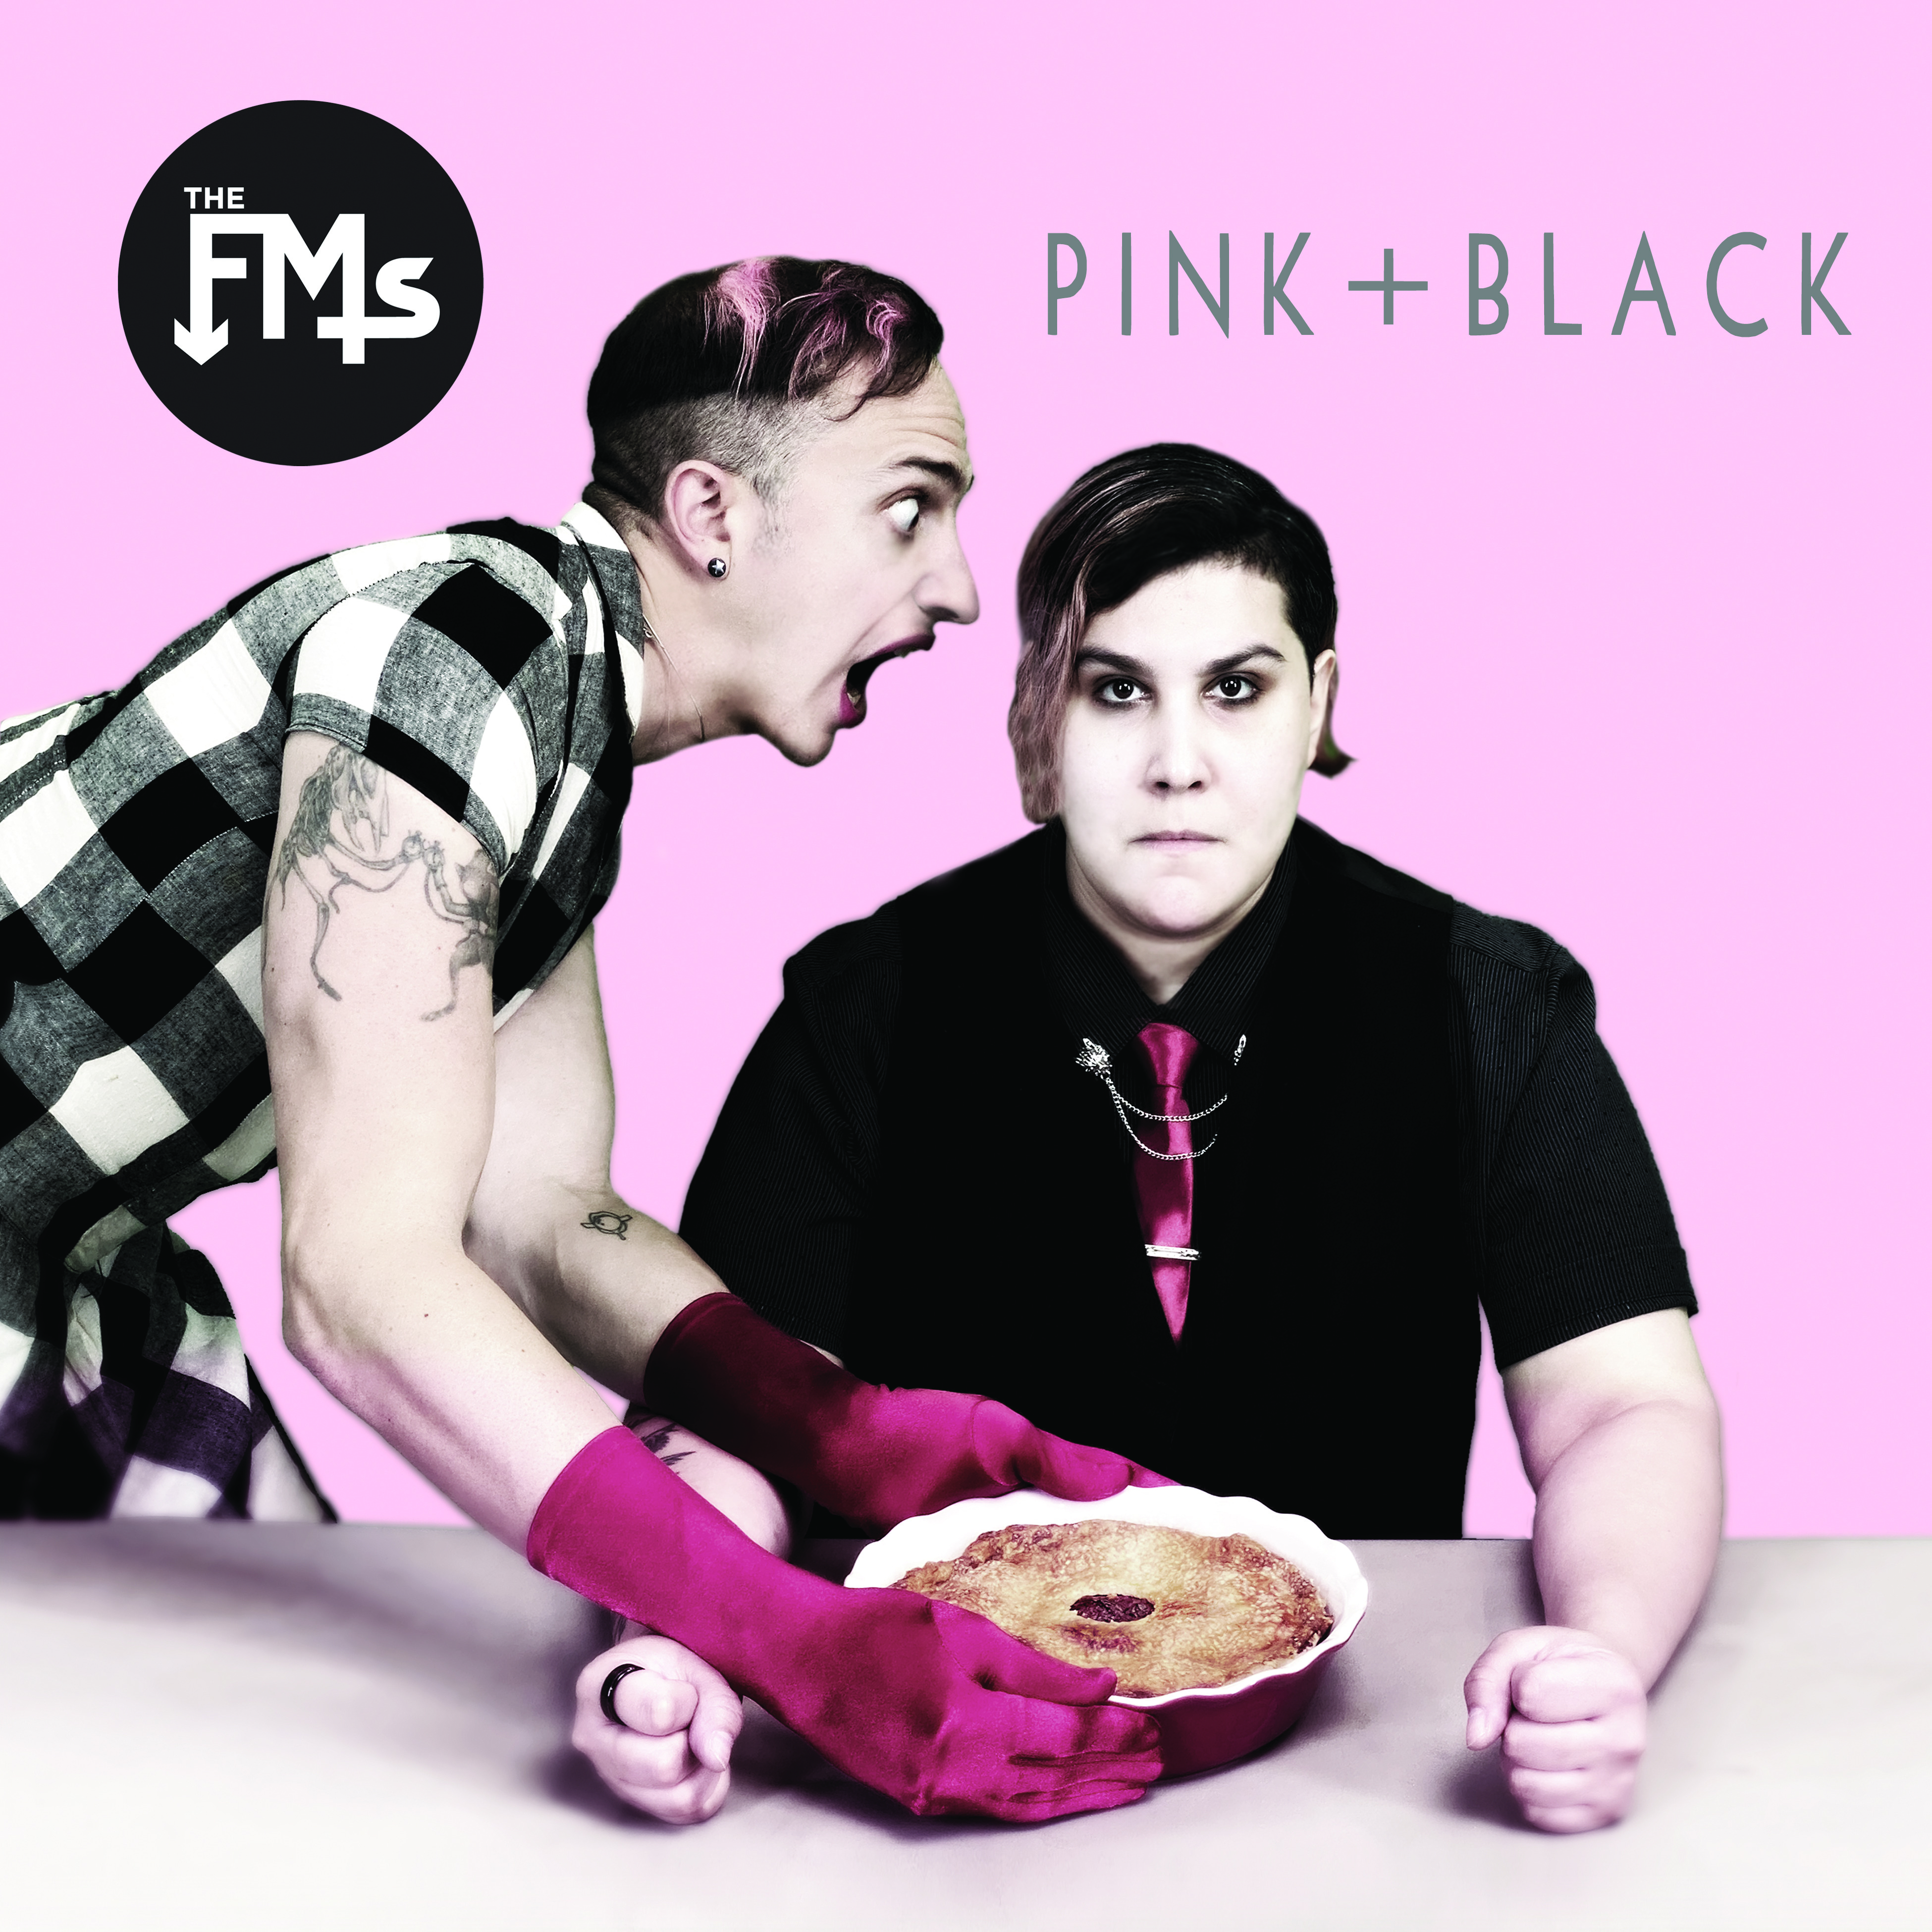 The FMs announce the release of PINK + BLACK, out on May 10